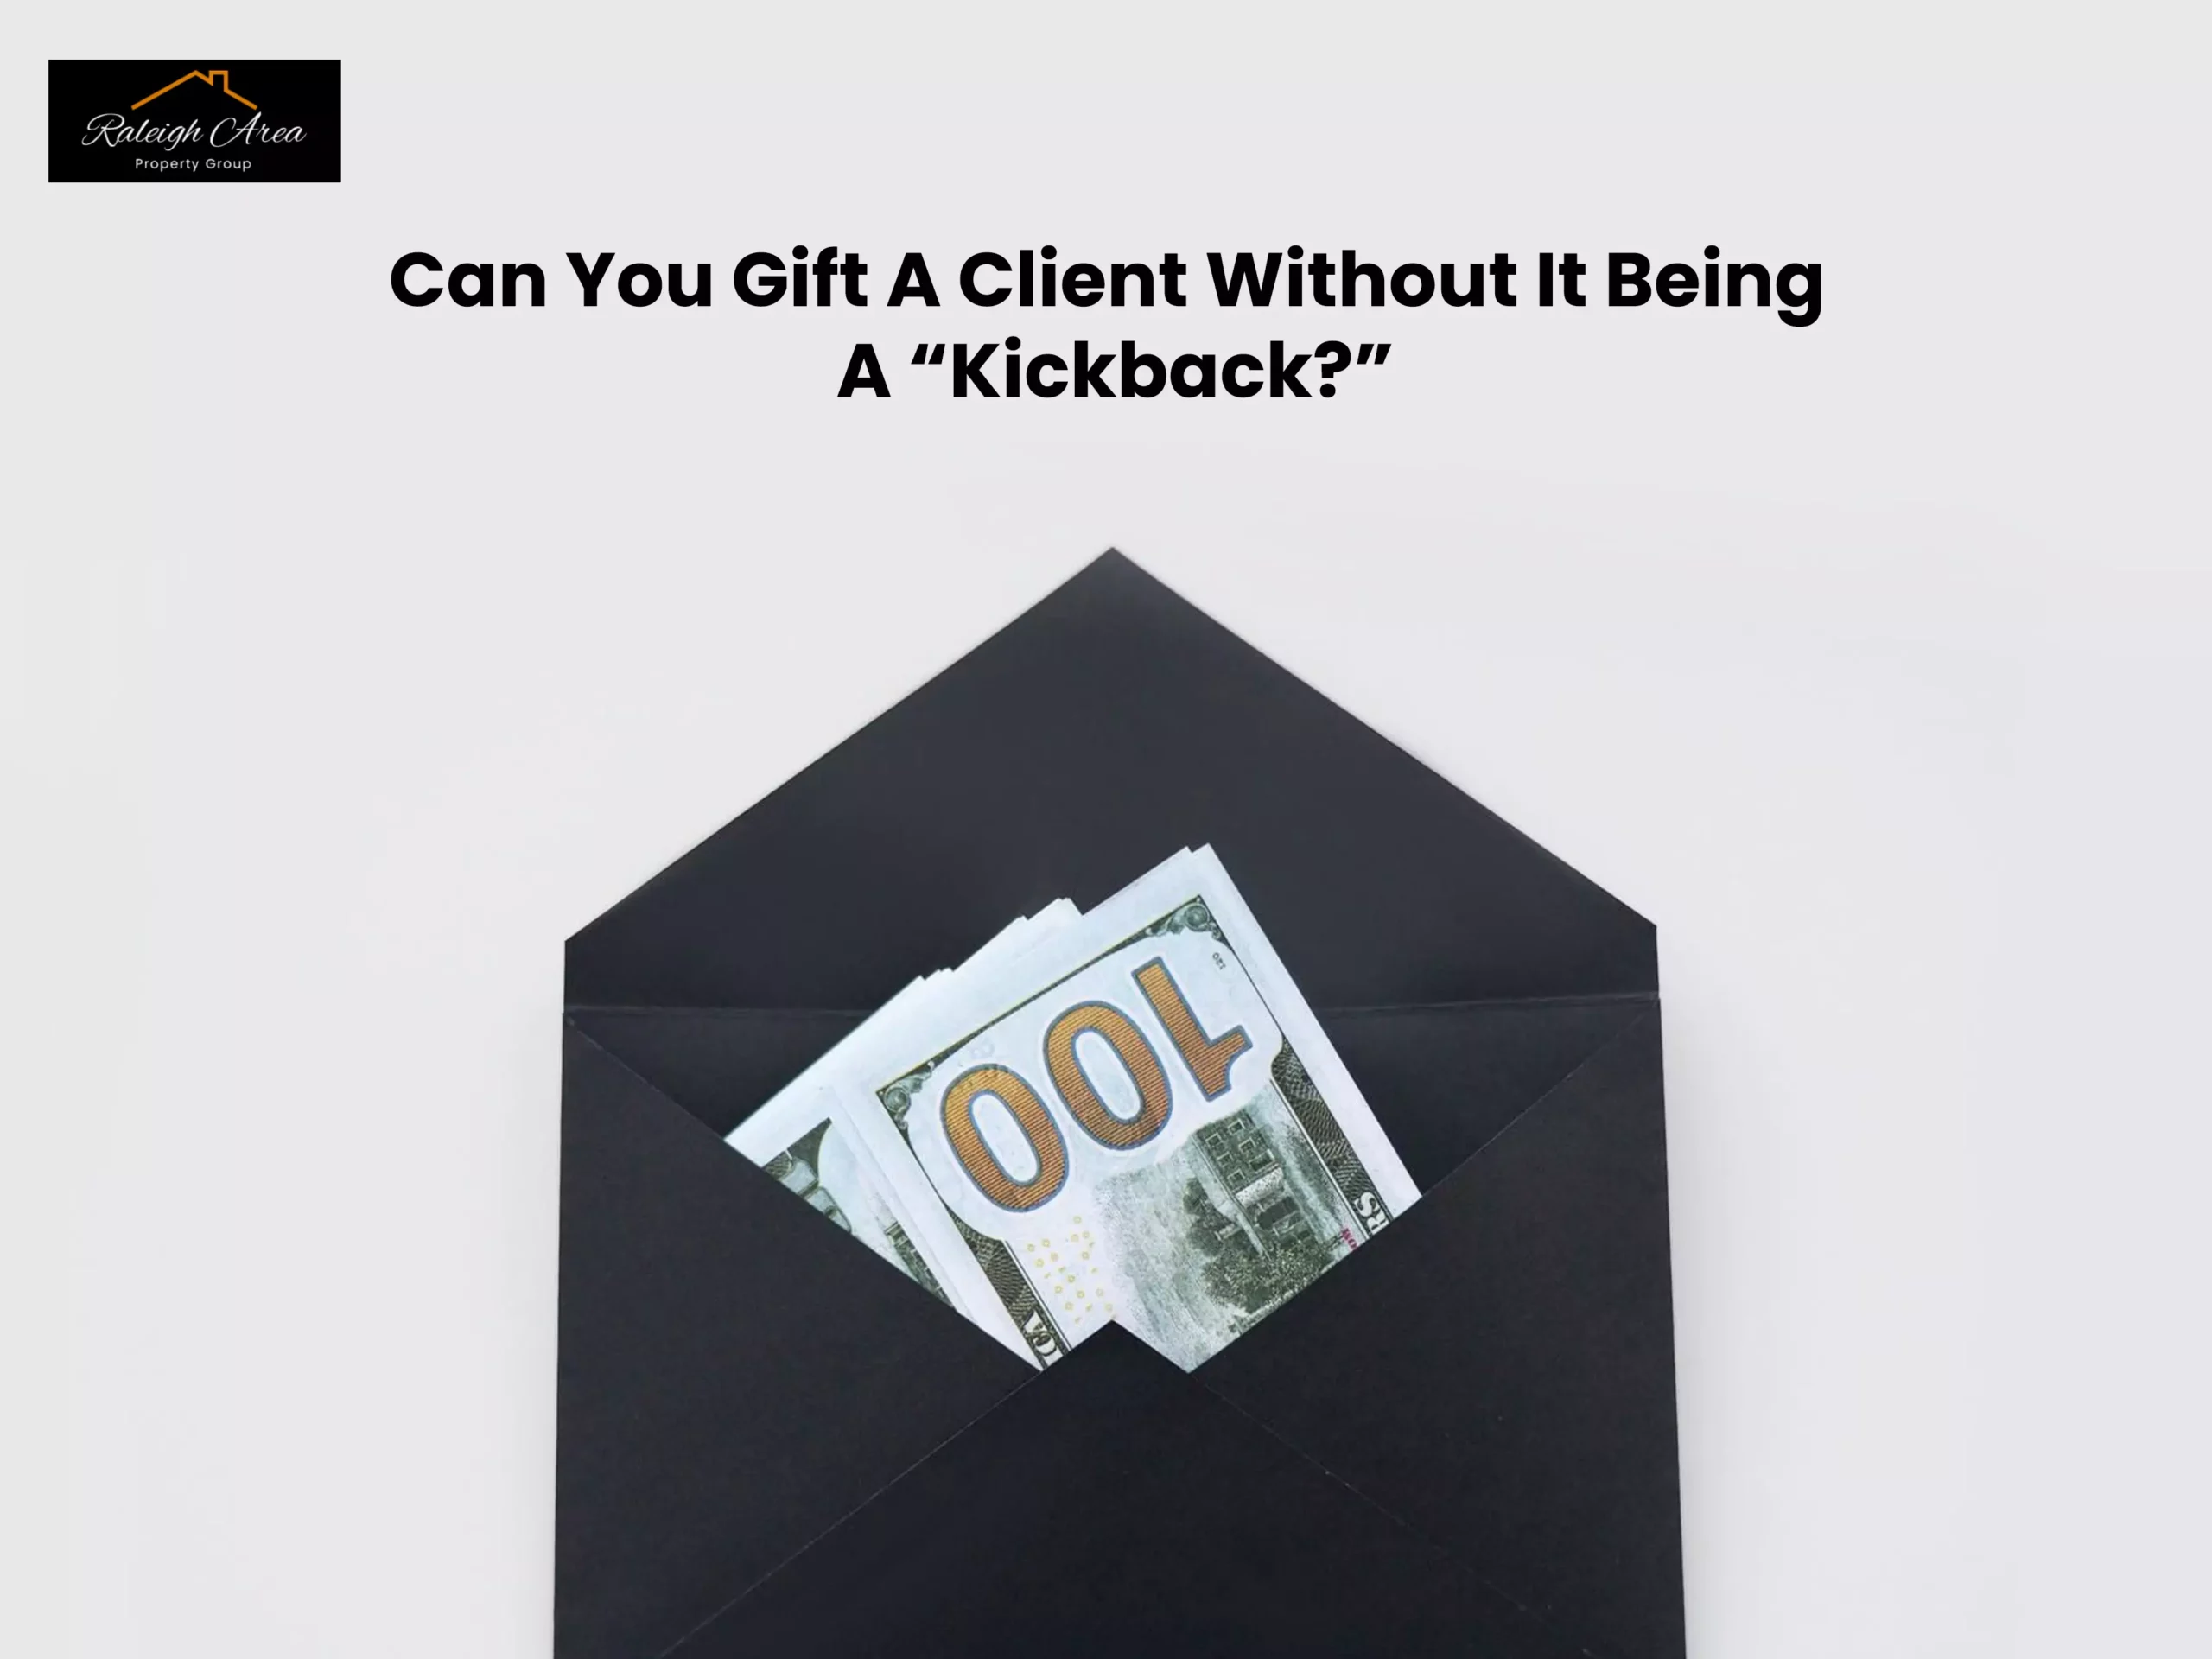 Can You Gift A Client Without It Being A "Kickback?" - img